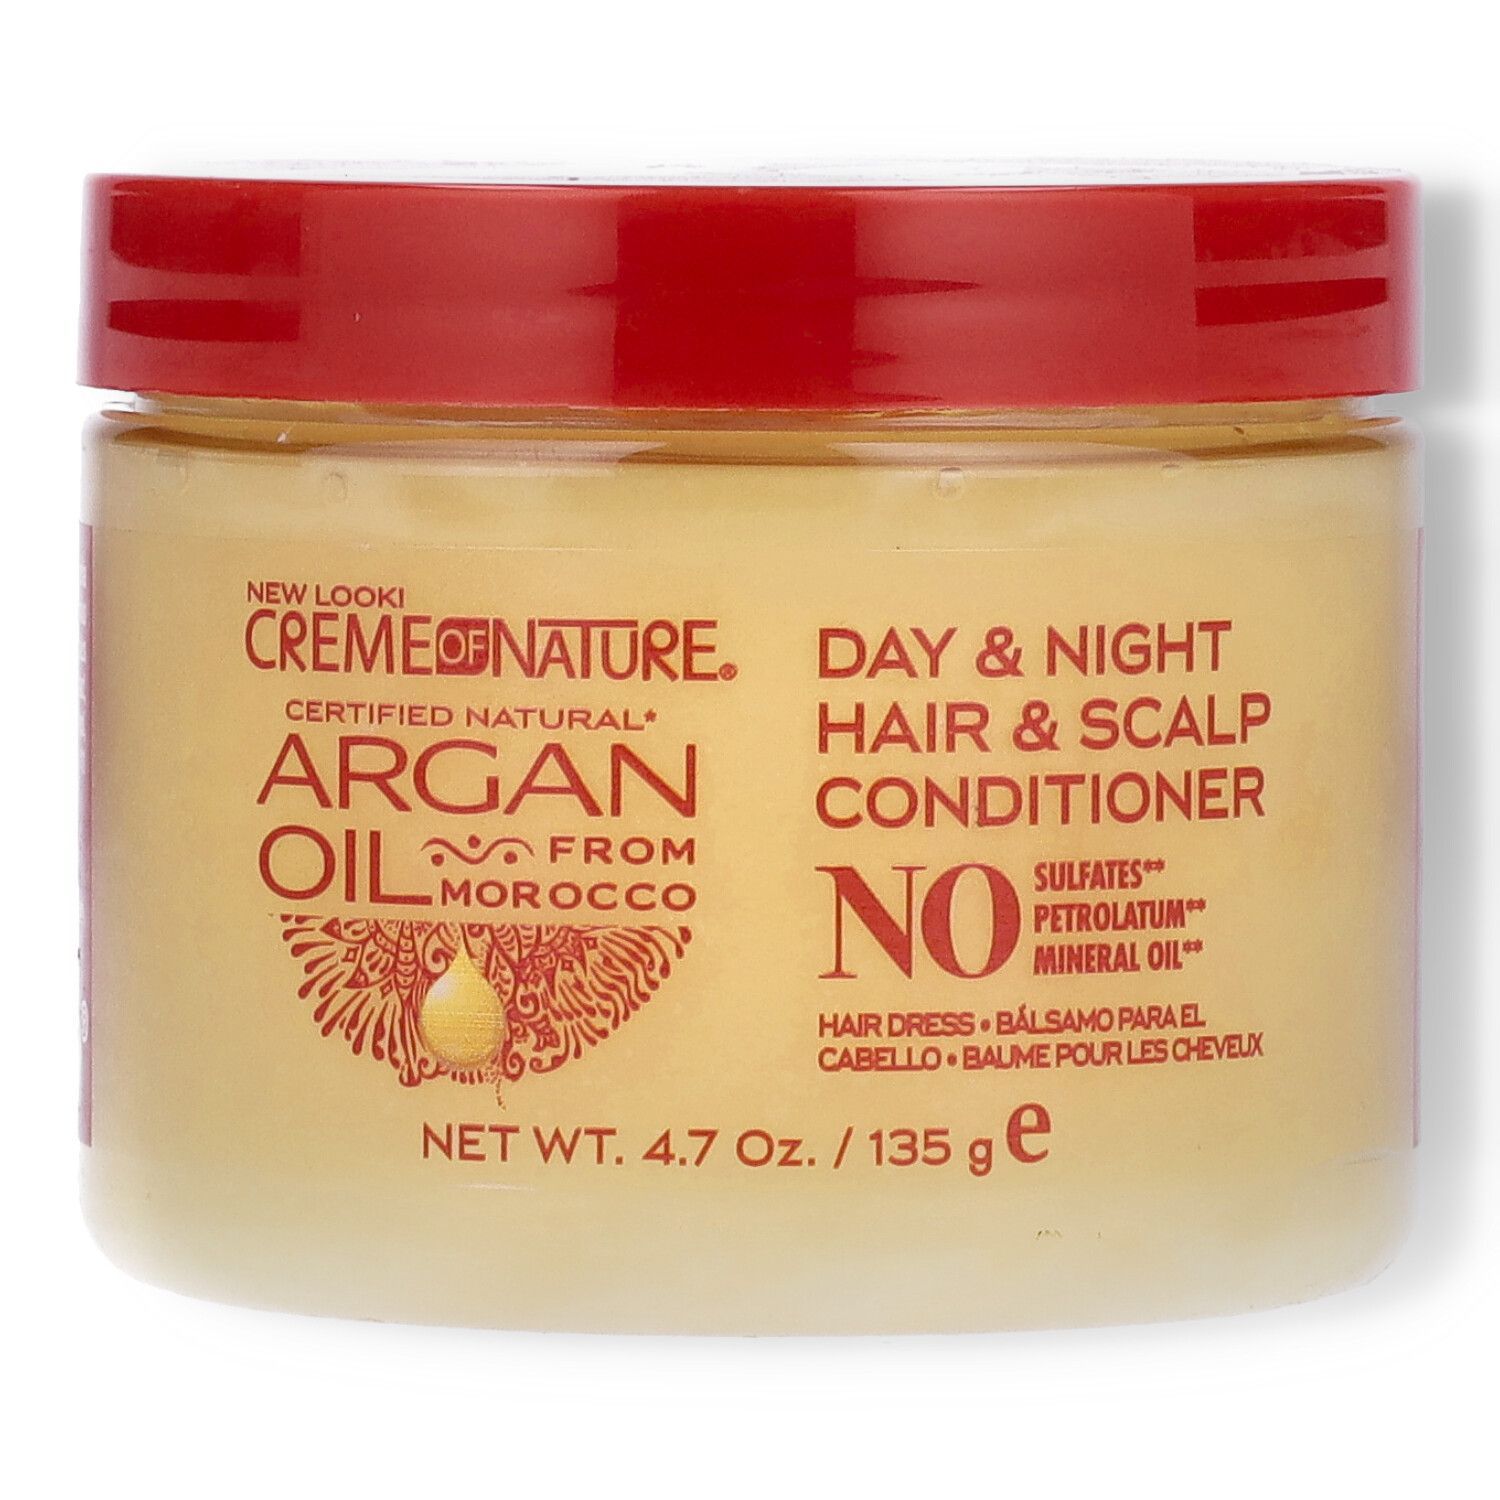 Creme Of Nature Argan Oil Day & Night Hair & Scalp Conditioner Hairdress - 4.76oz